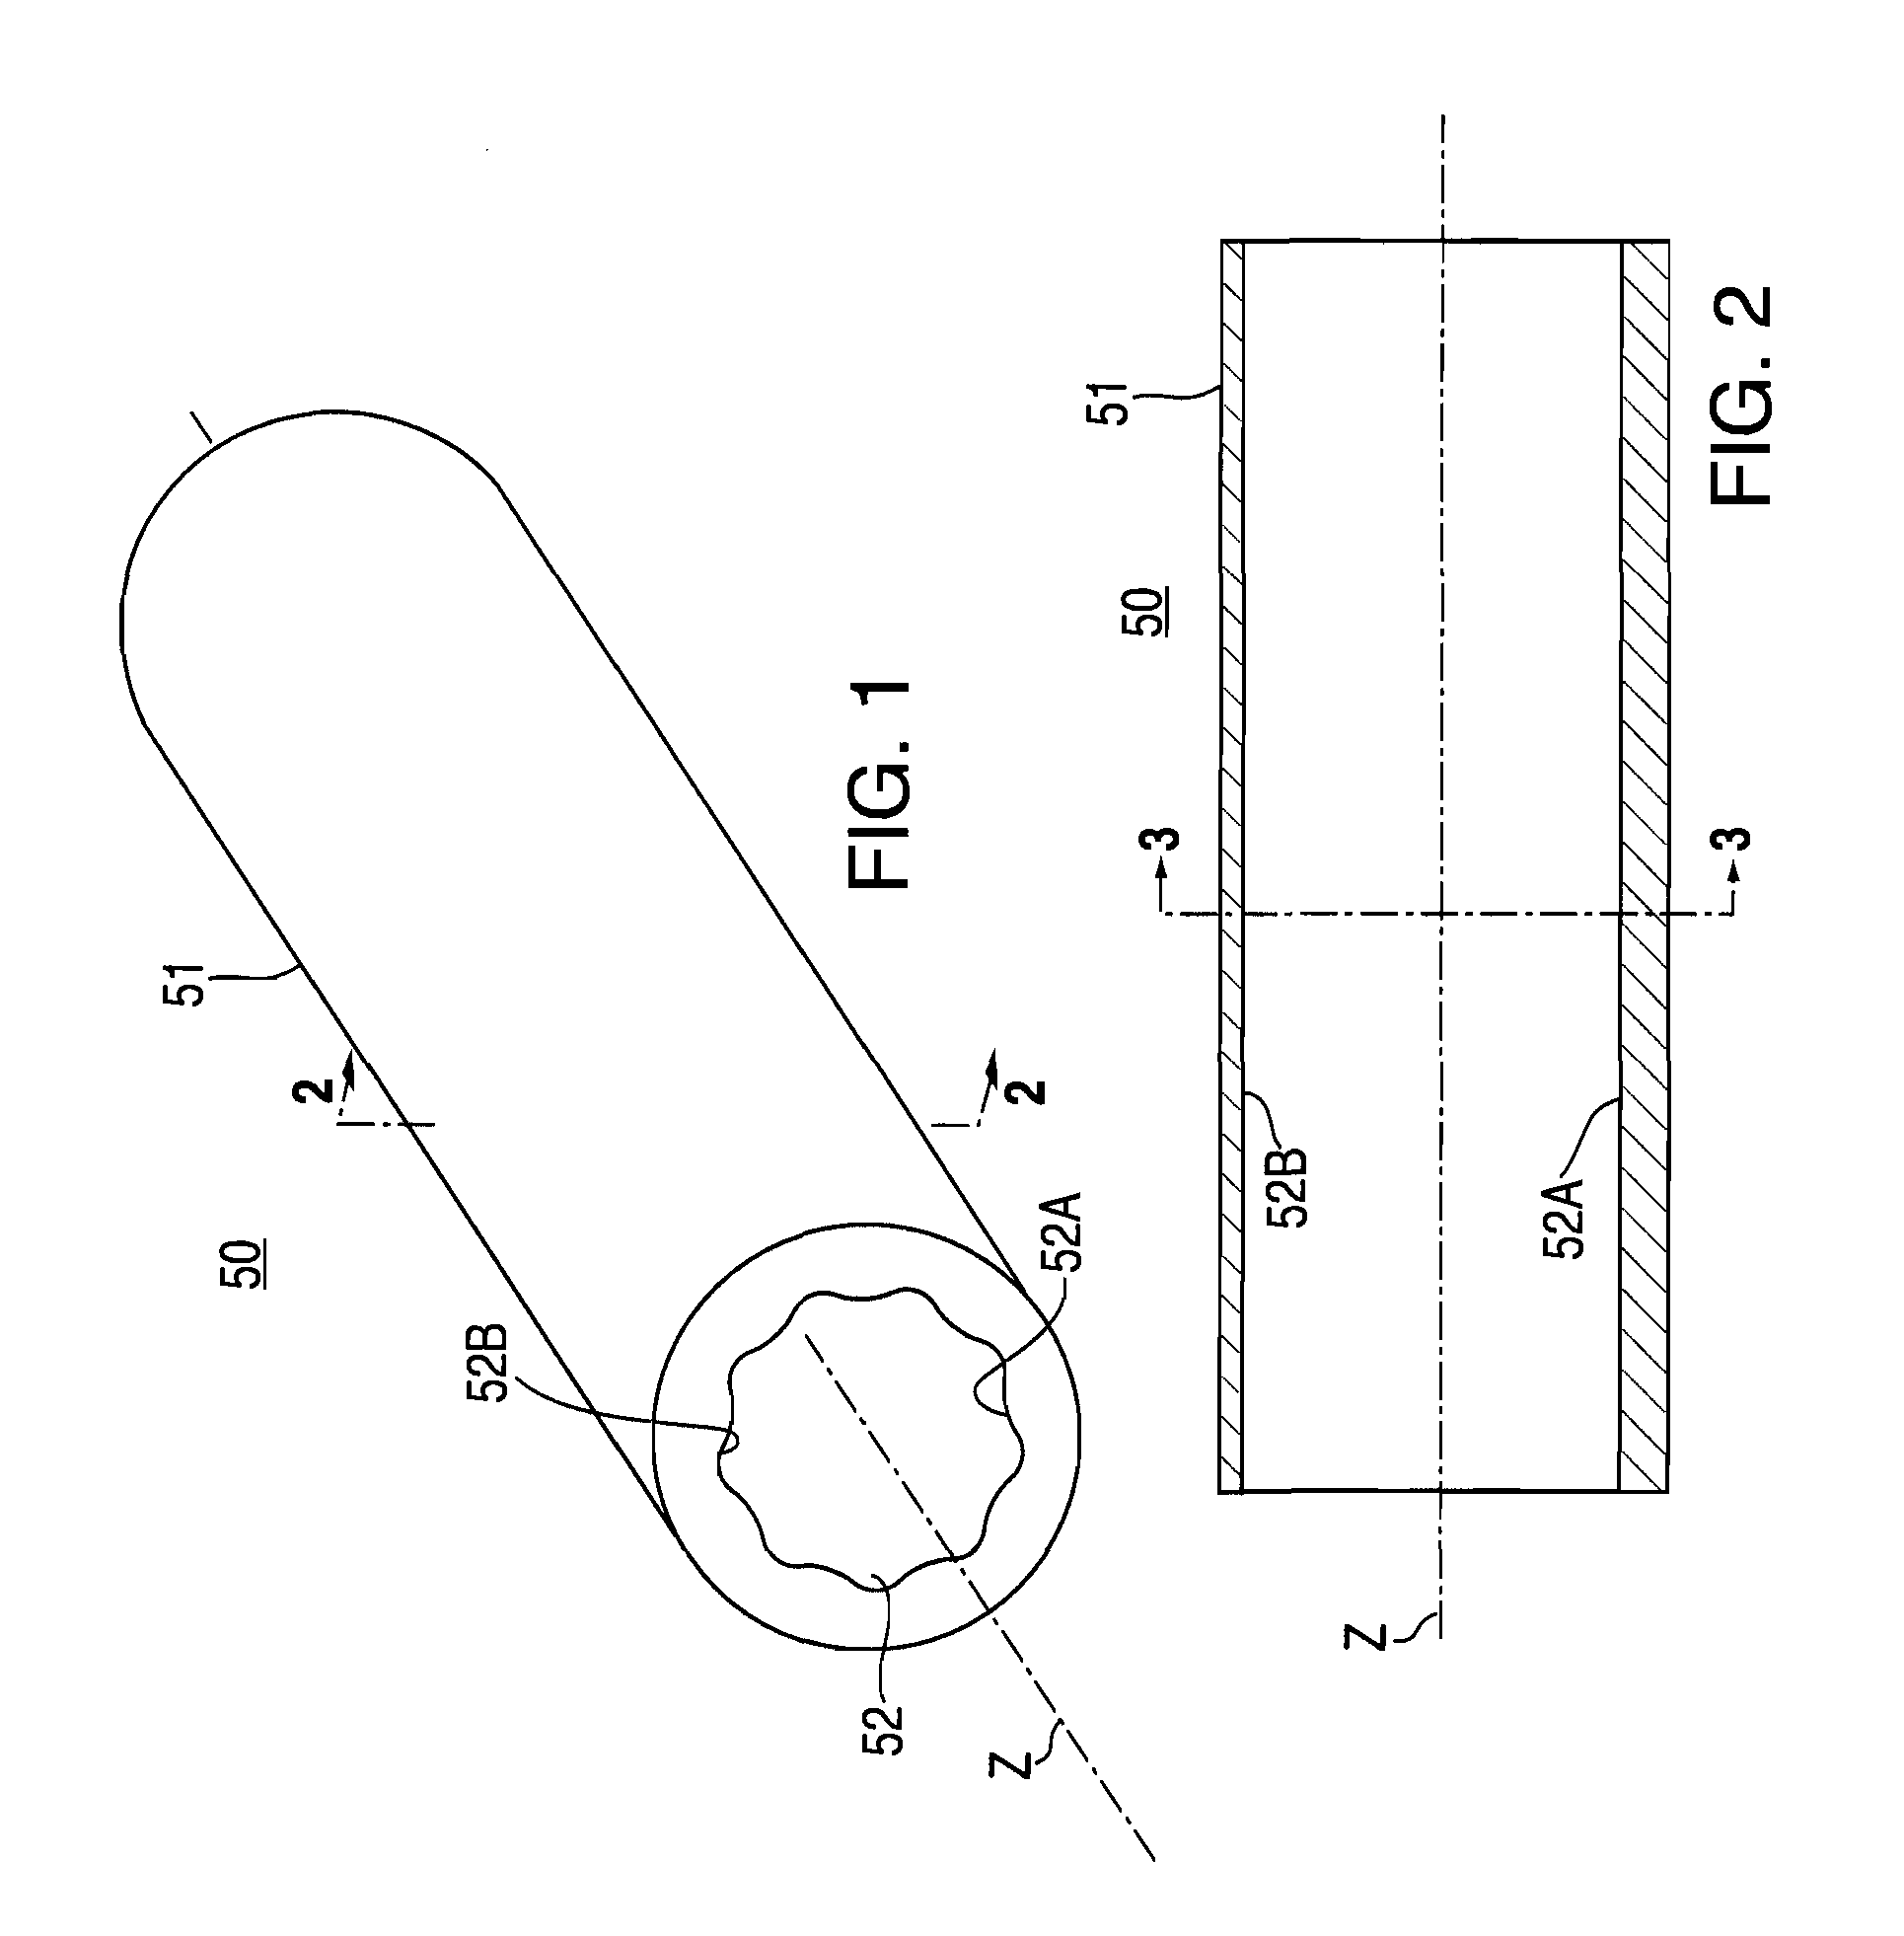 Motion Transmitting Cable Liner and Assemblies Containing Same